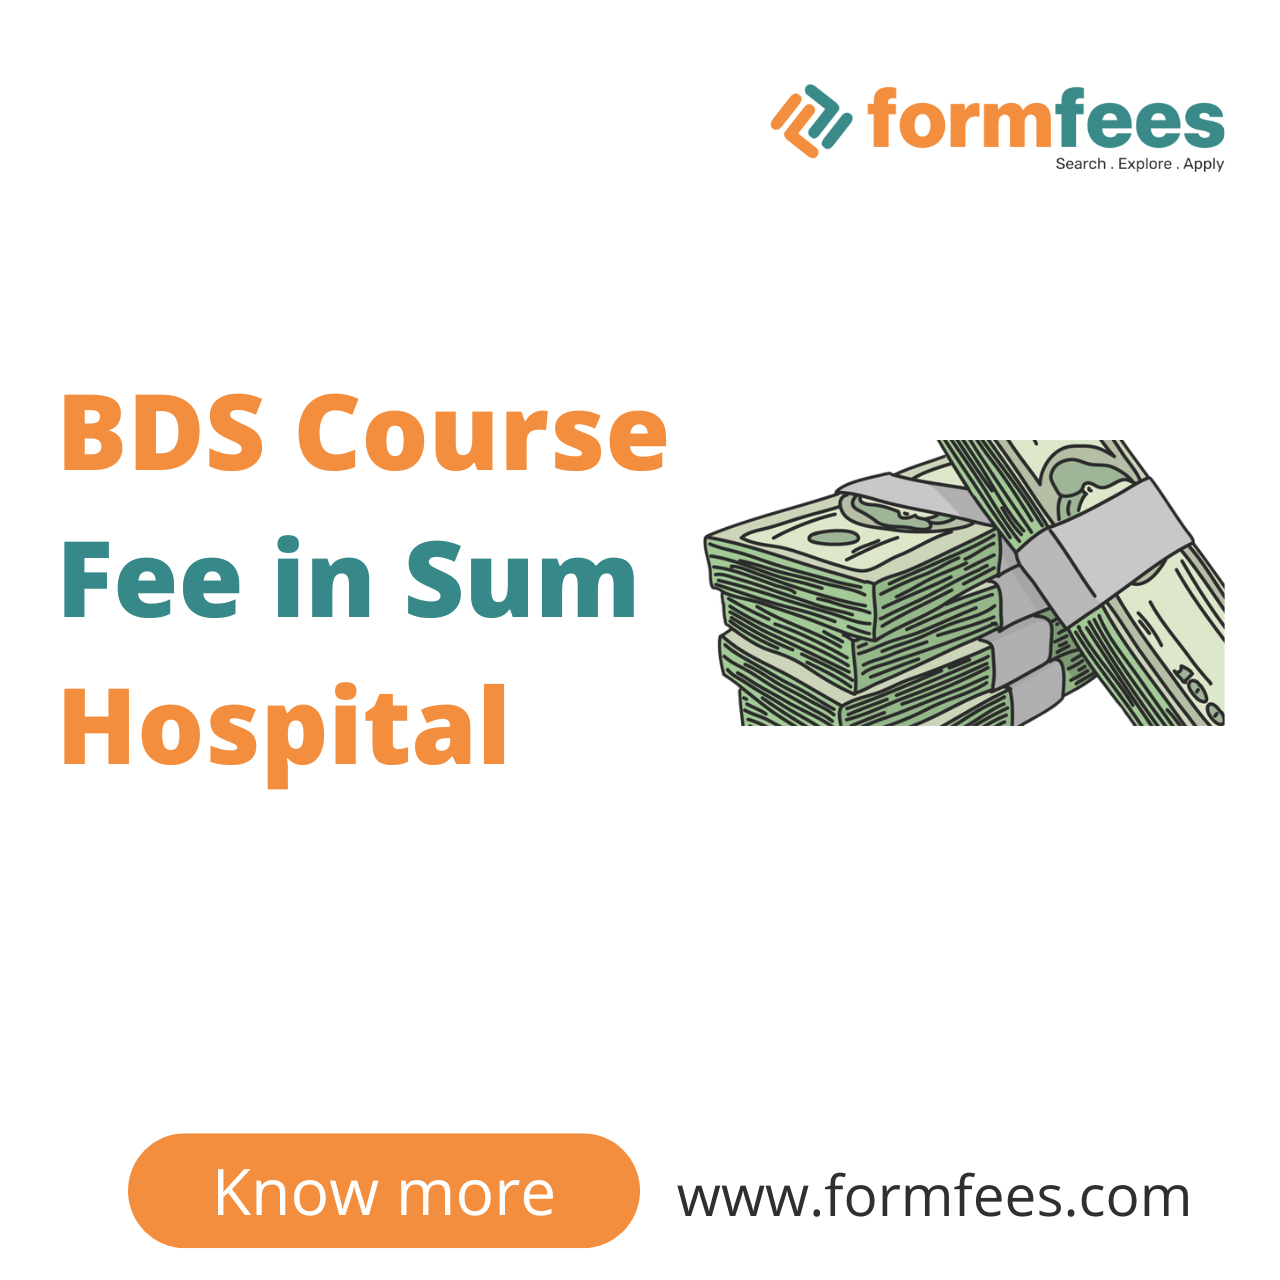 BDS-Course-Fee-in-Sum-Hospital